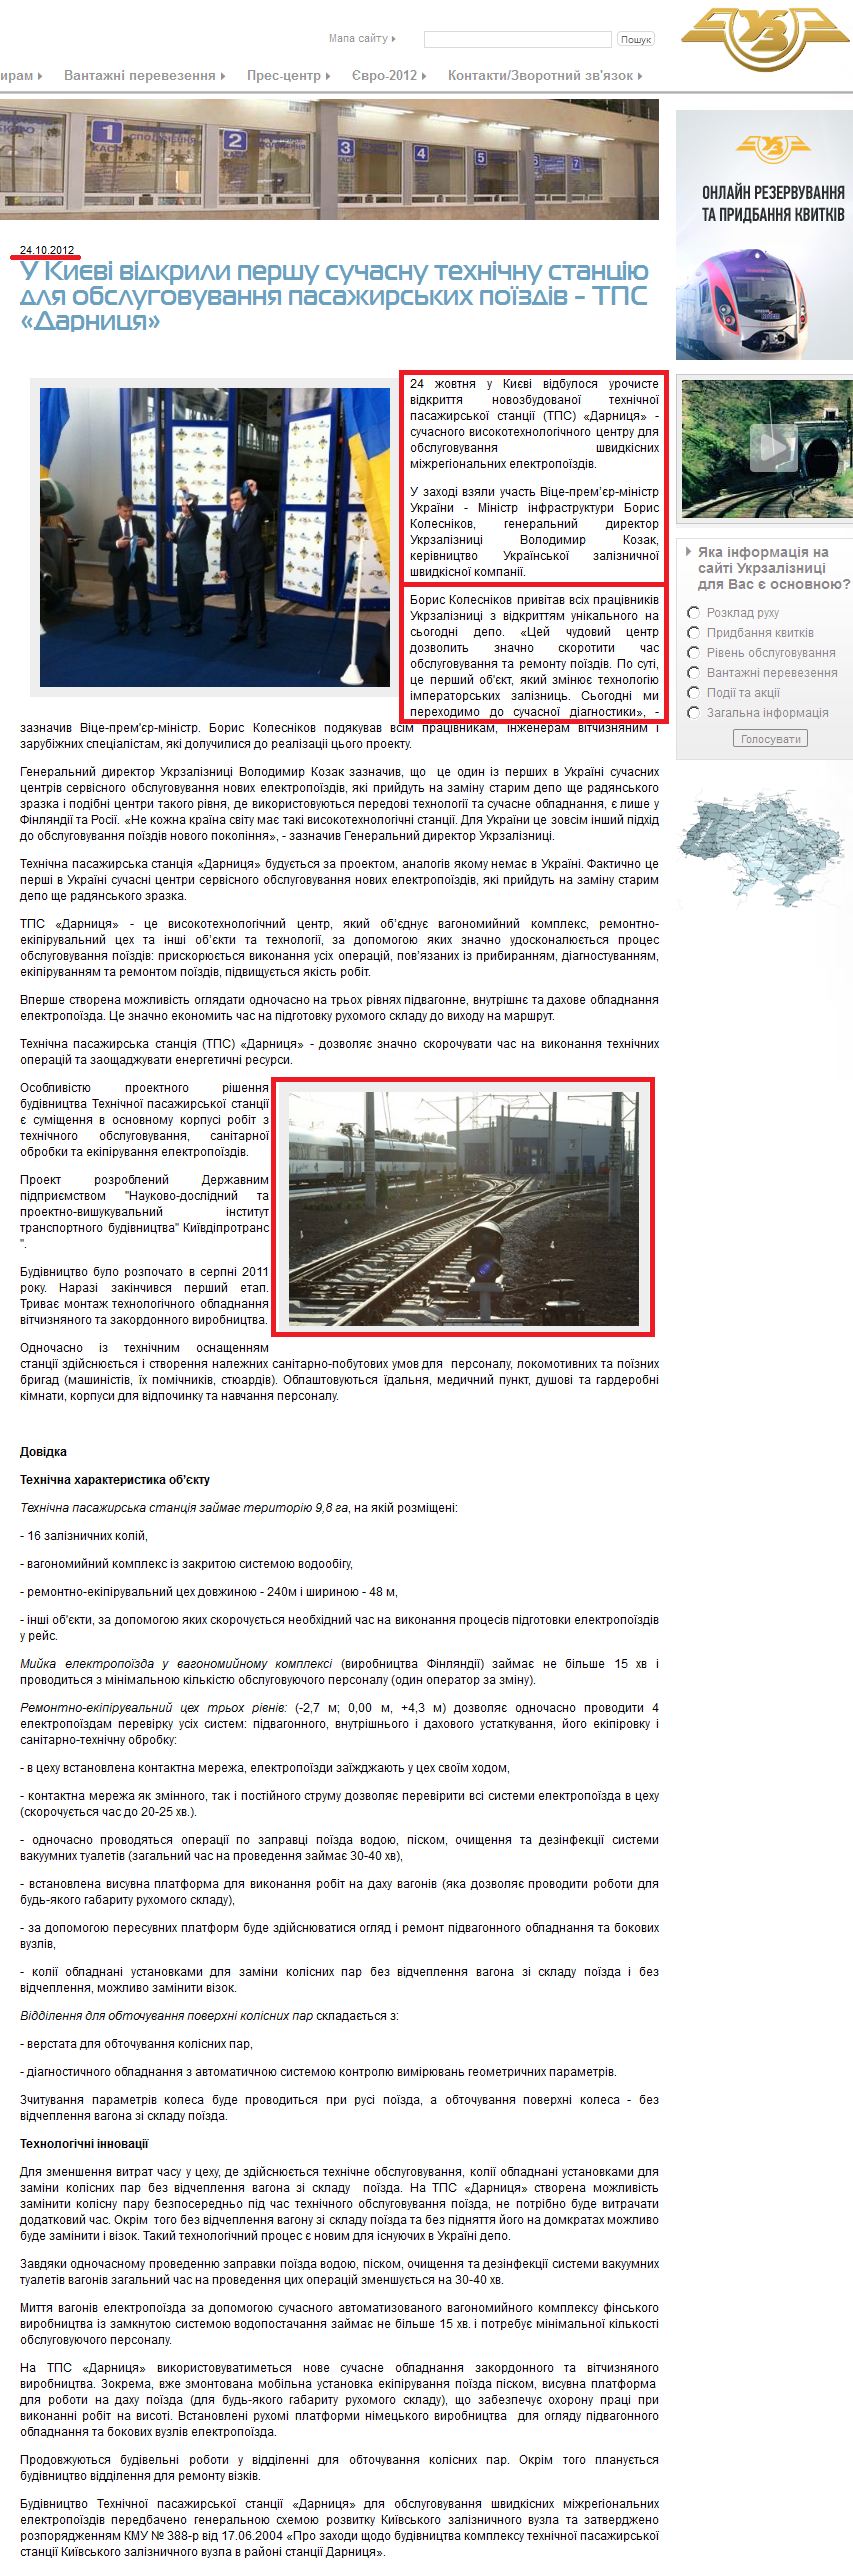 http://www.uz.gov.ua/press_center/up_to_date_topic/page-2/324346/